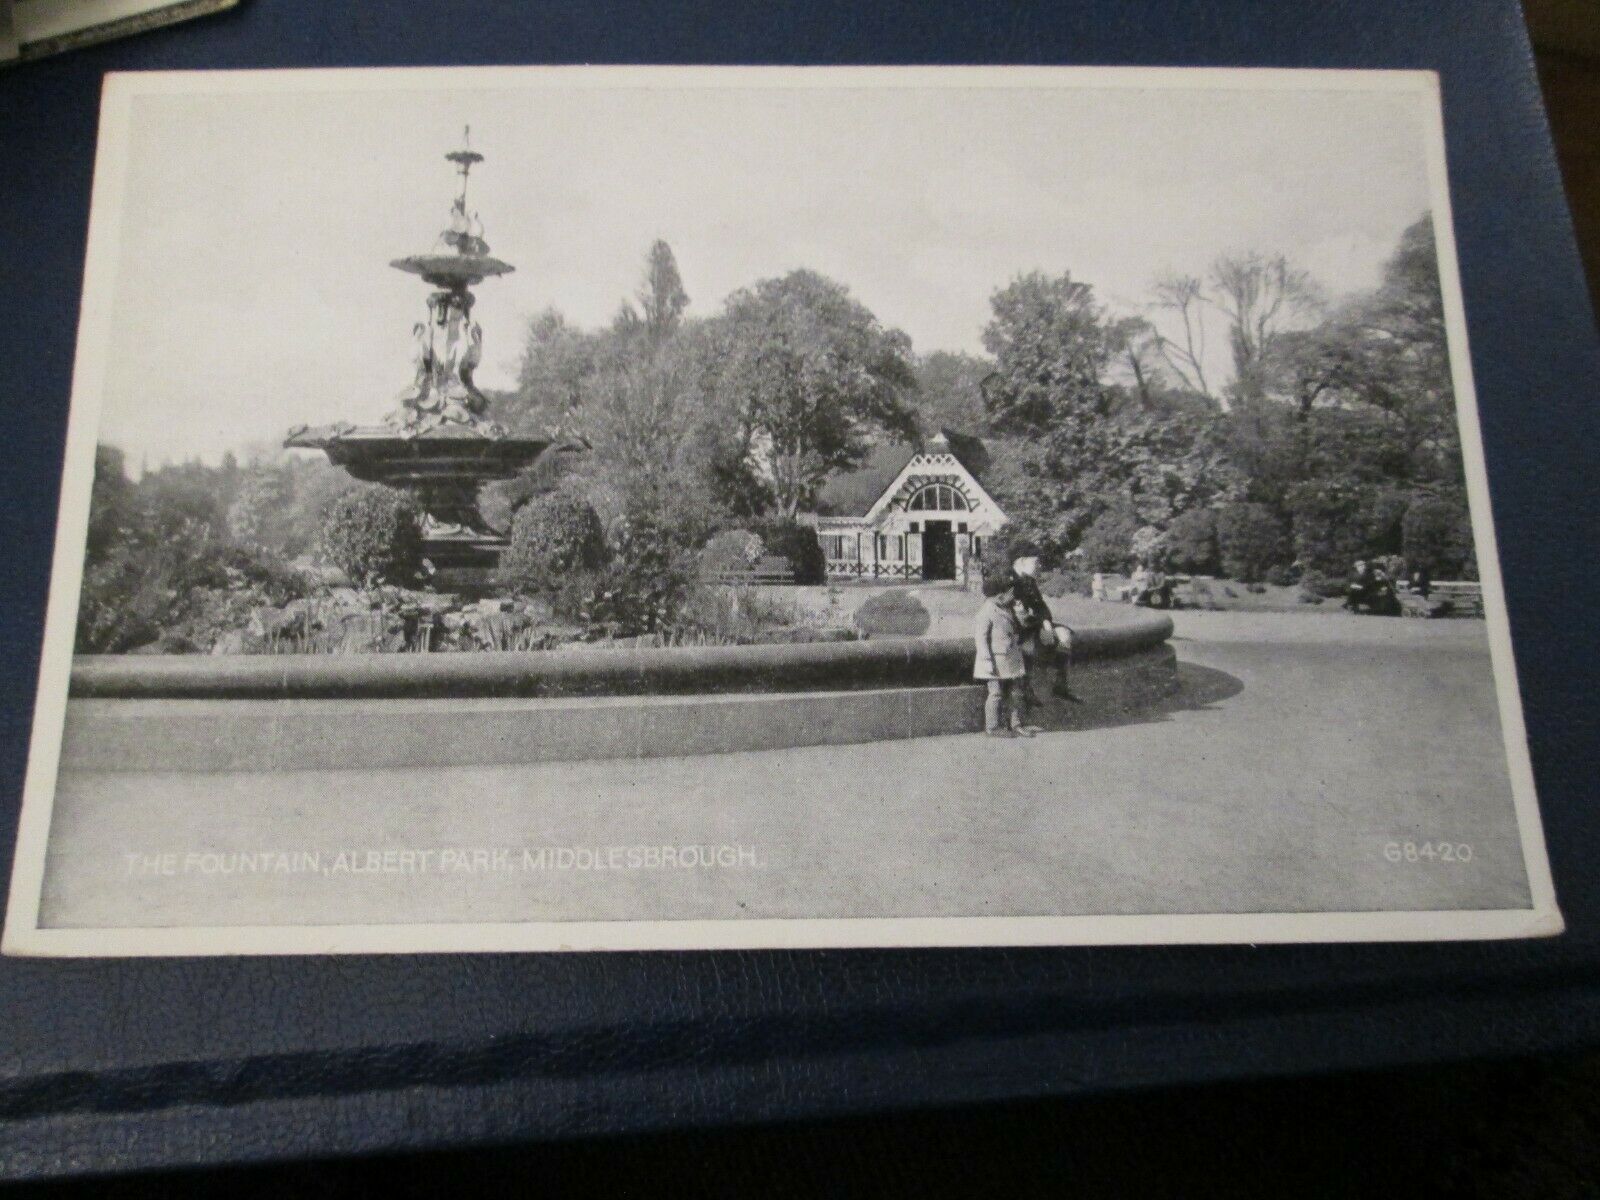 House Clearance - Service of The Fountain, Albert Park, Middlesbrough G8420 (Unposted)